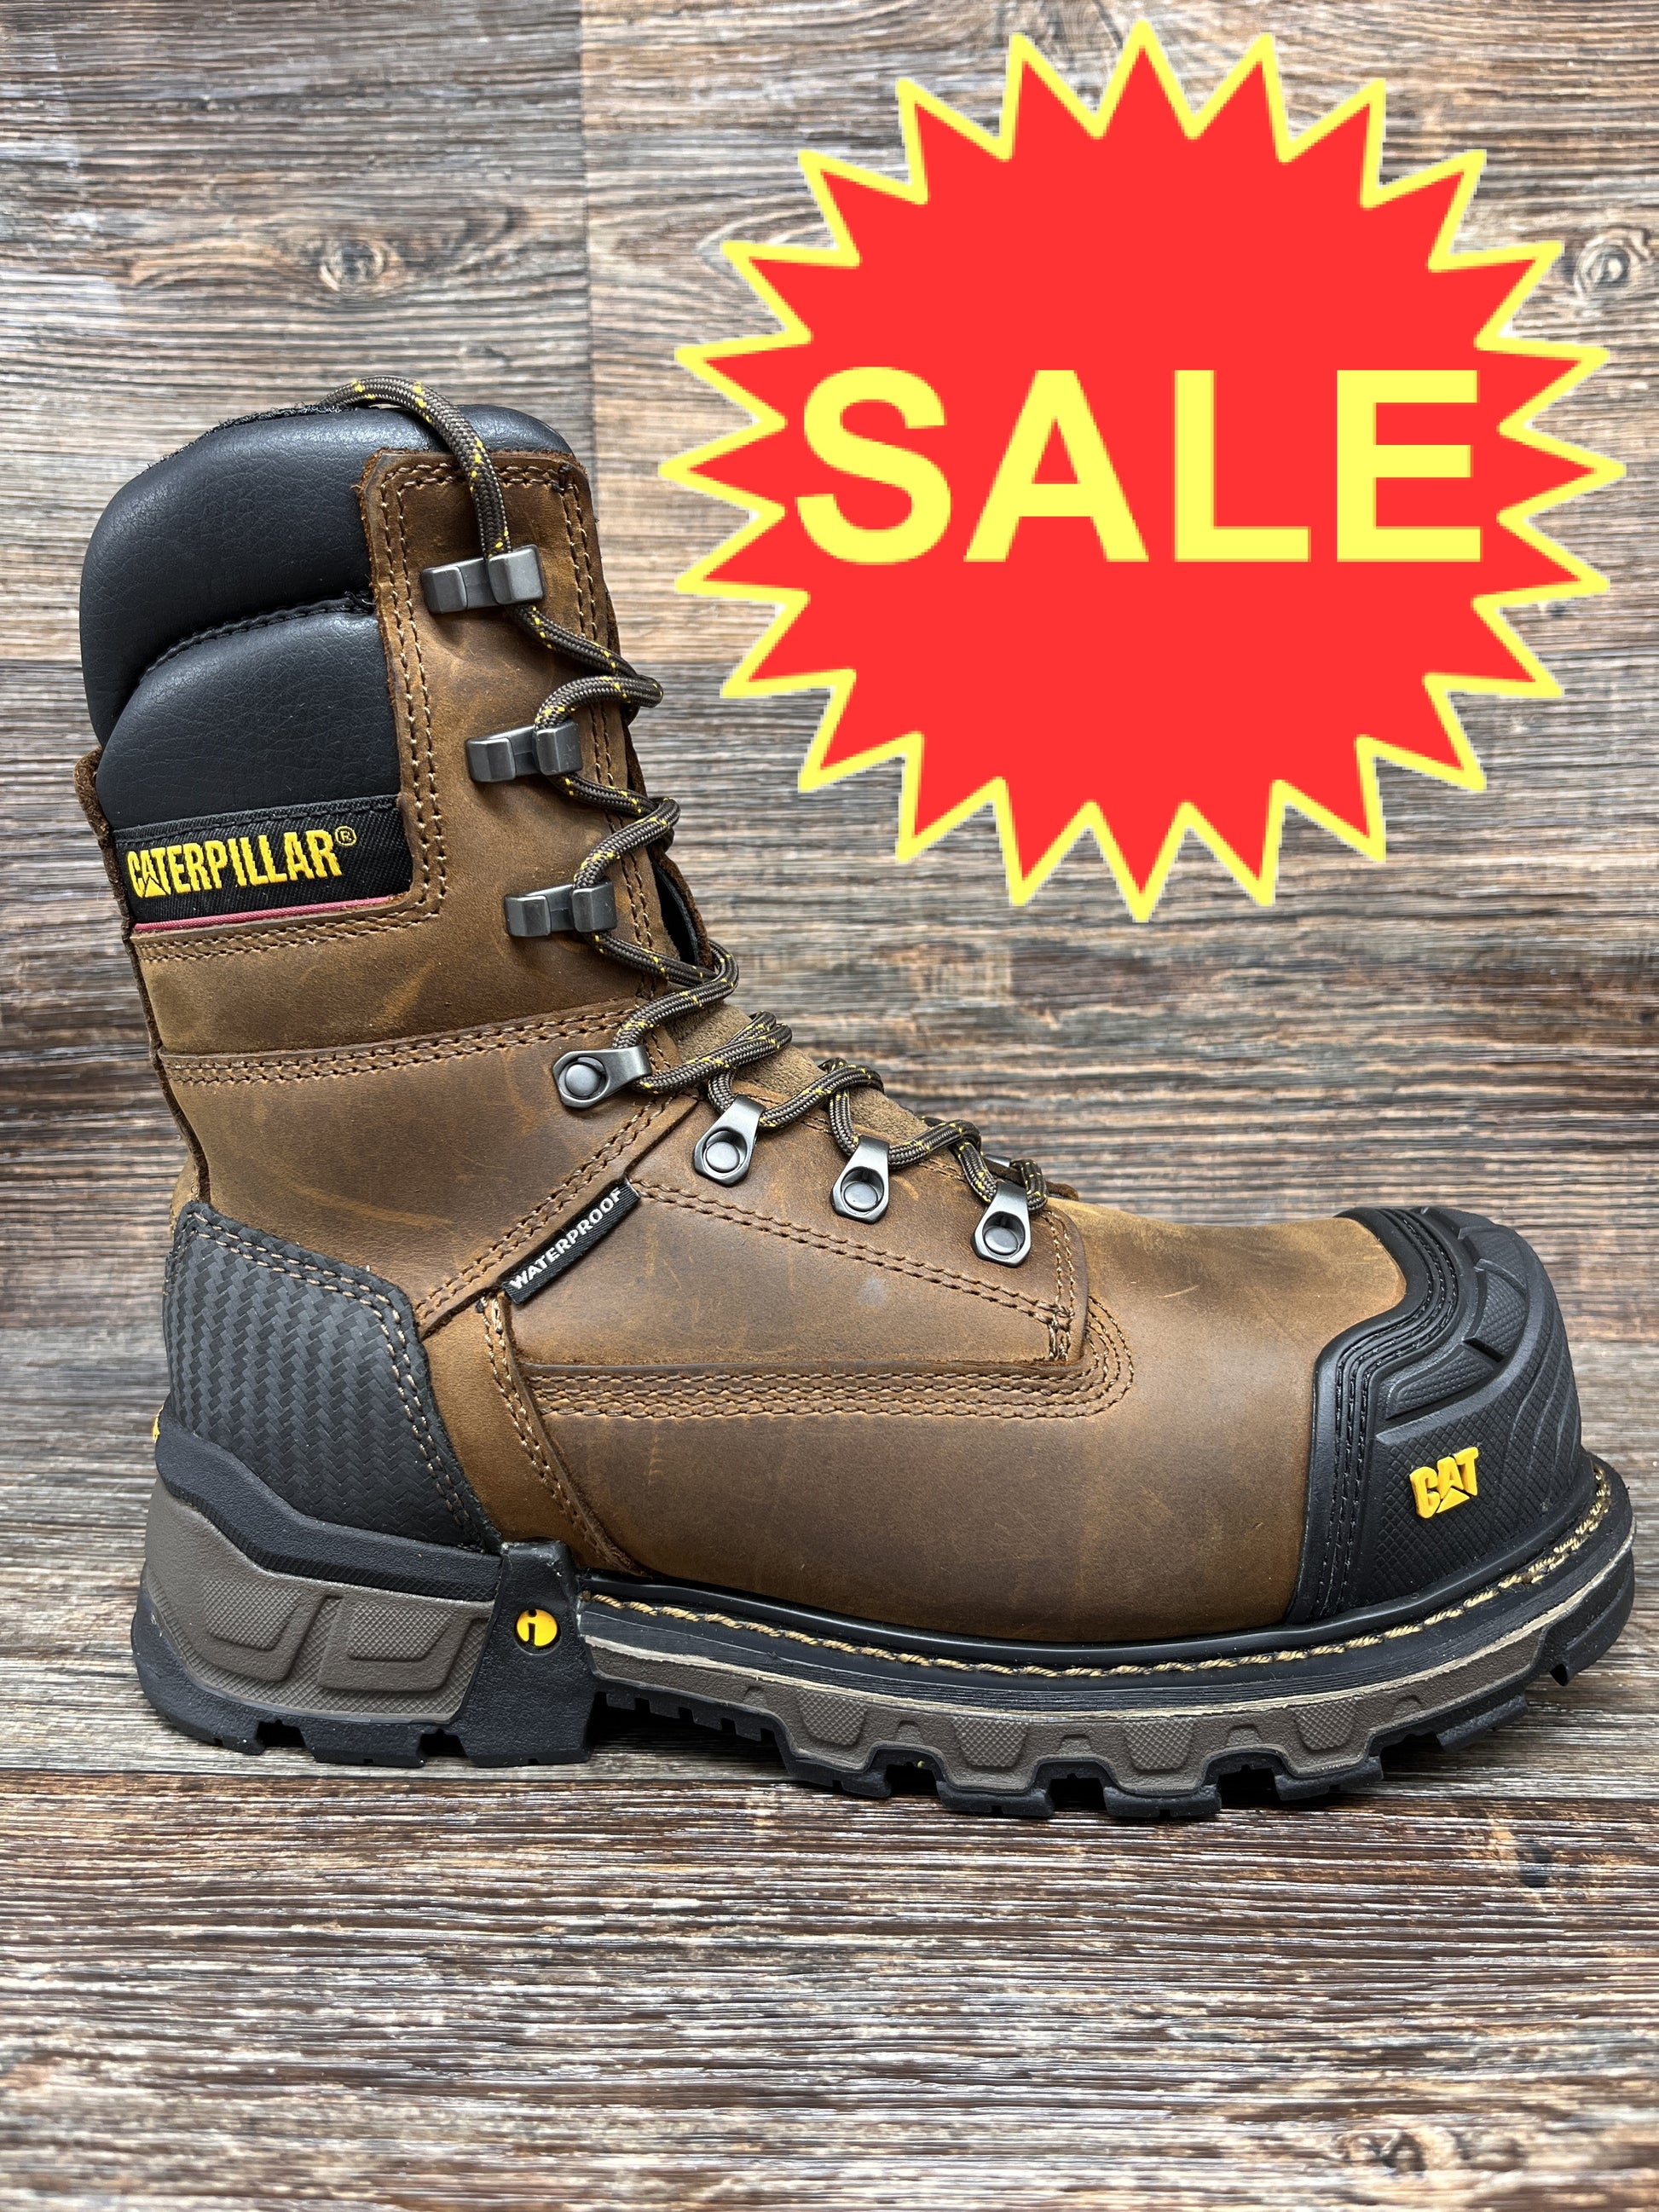 Men's Excavator XL 8 inch Composite Toe Work by Rushing Boots